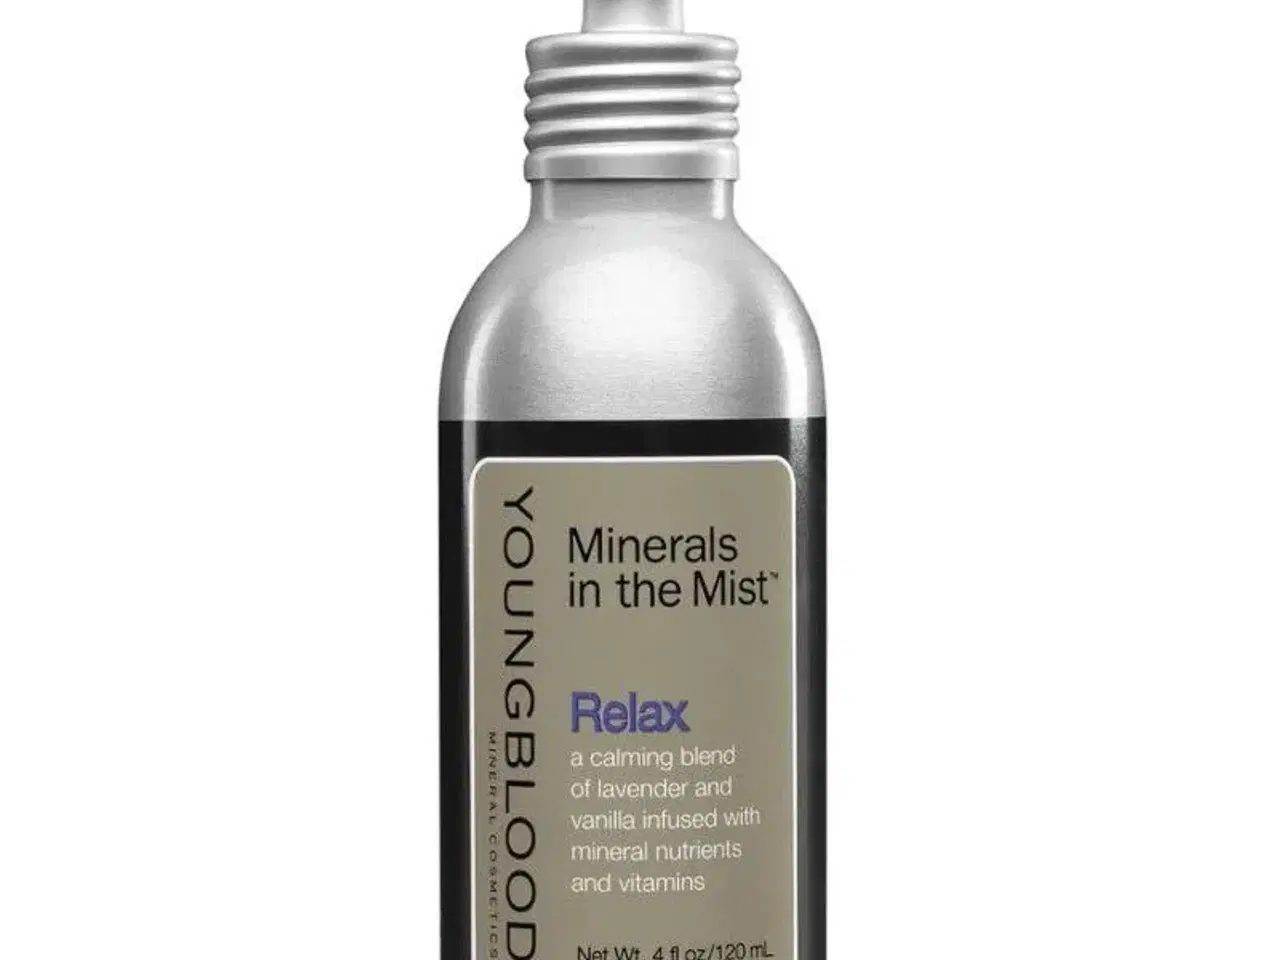 Billede 1 - Youngblood Minerals in the Mist RELAX 120 mL